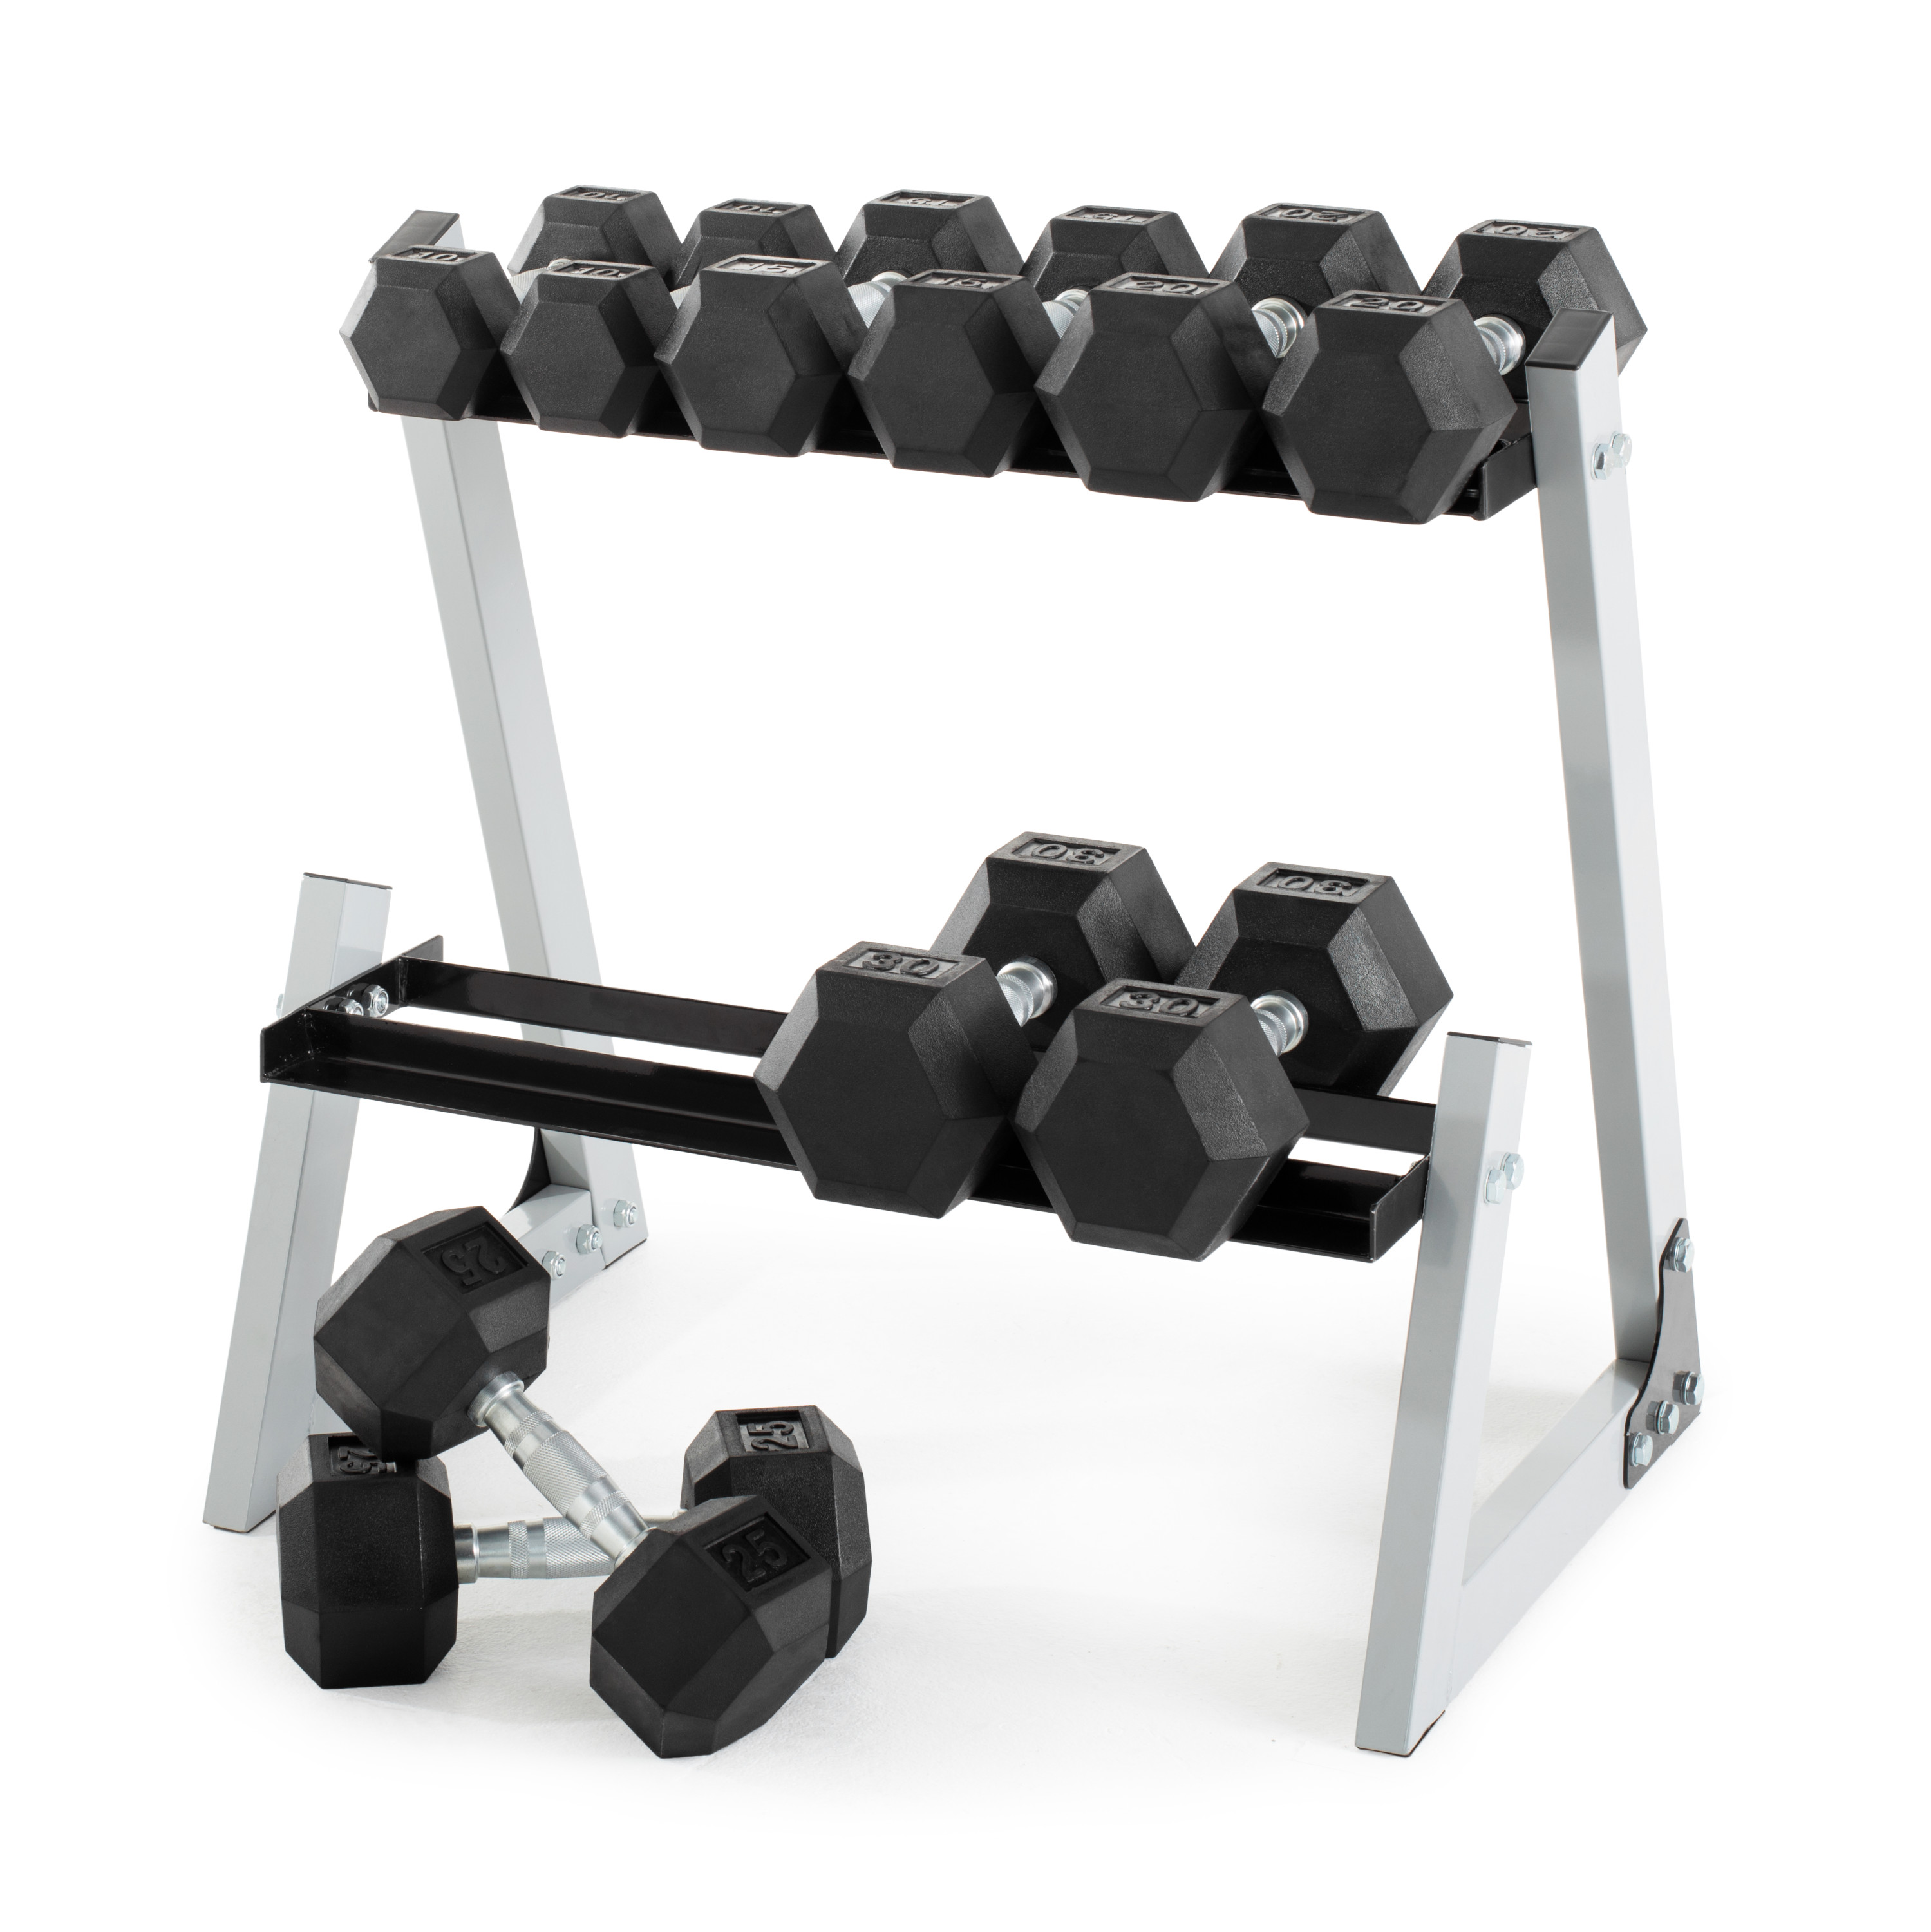 Weider 200 lb. Rubber Hex Dumbbell Weight Set with Weight Rack - image 3 of 12